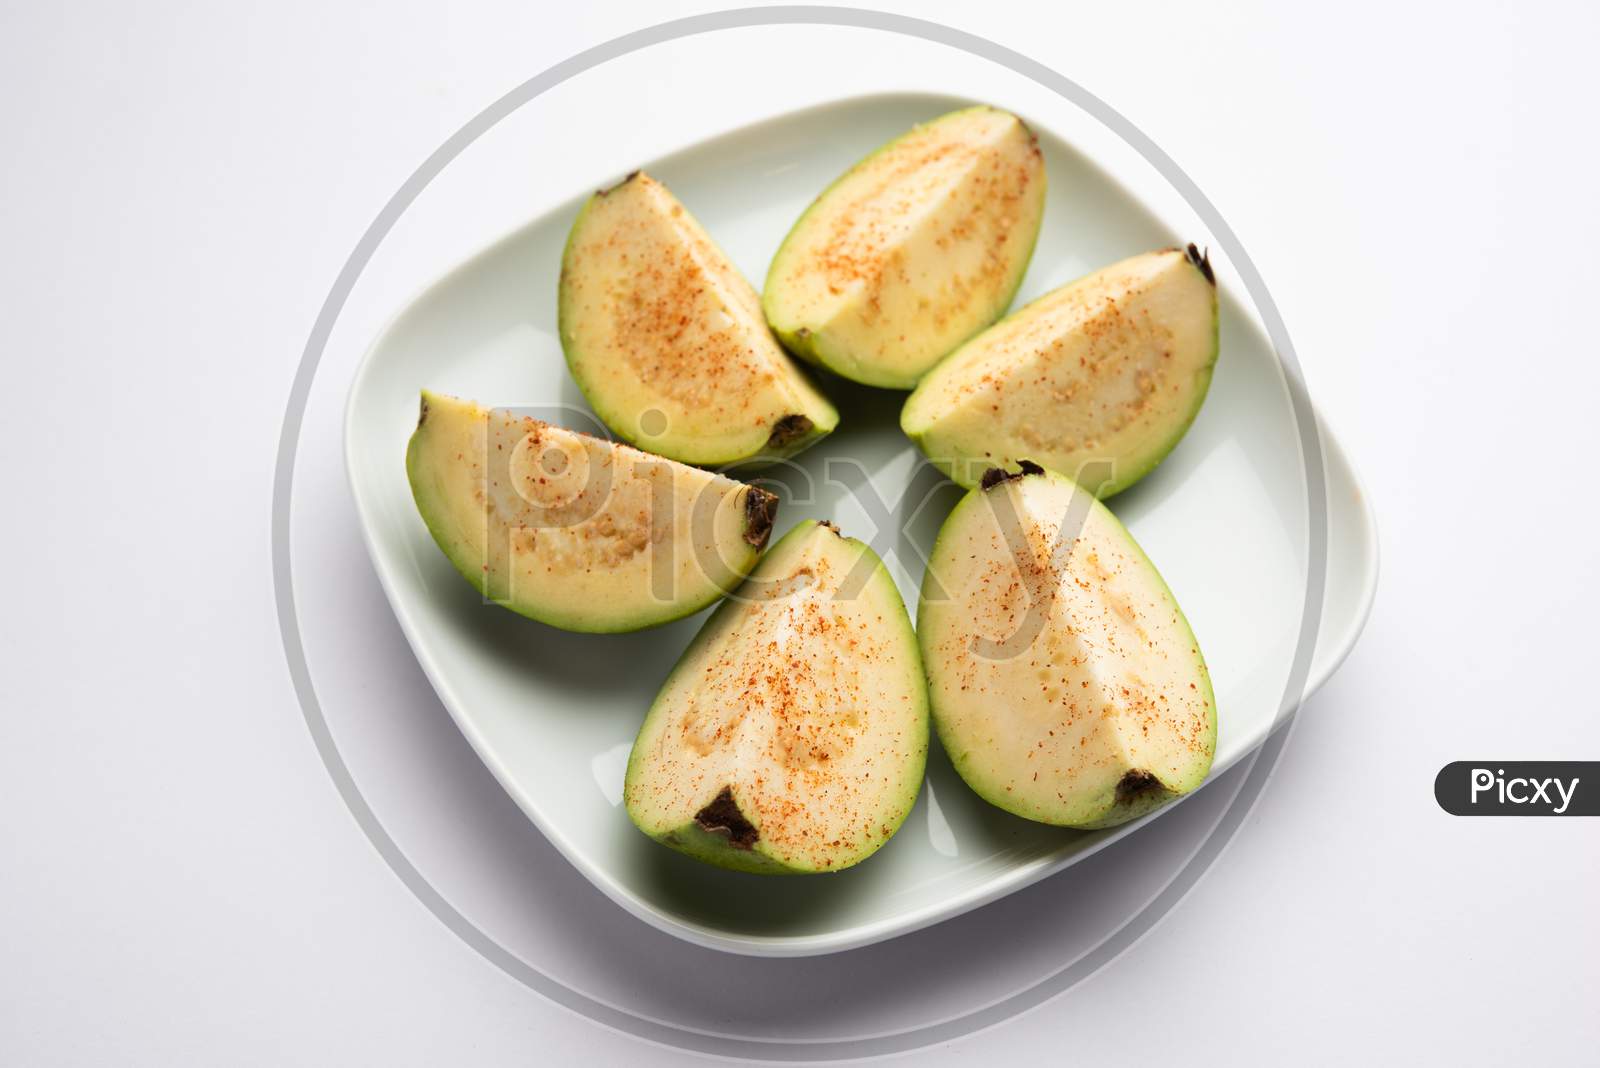 Guava Or Amrood With Salt And Chili Powder, Popular Seasonal Snacks From India